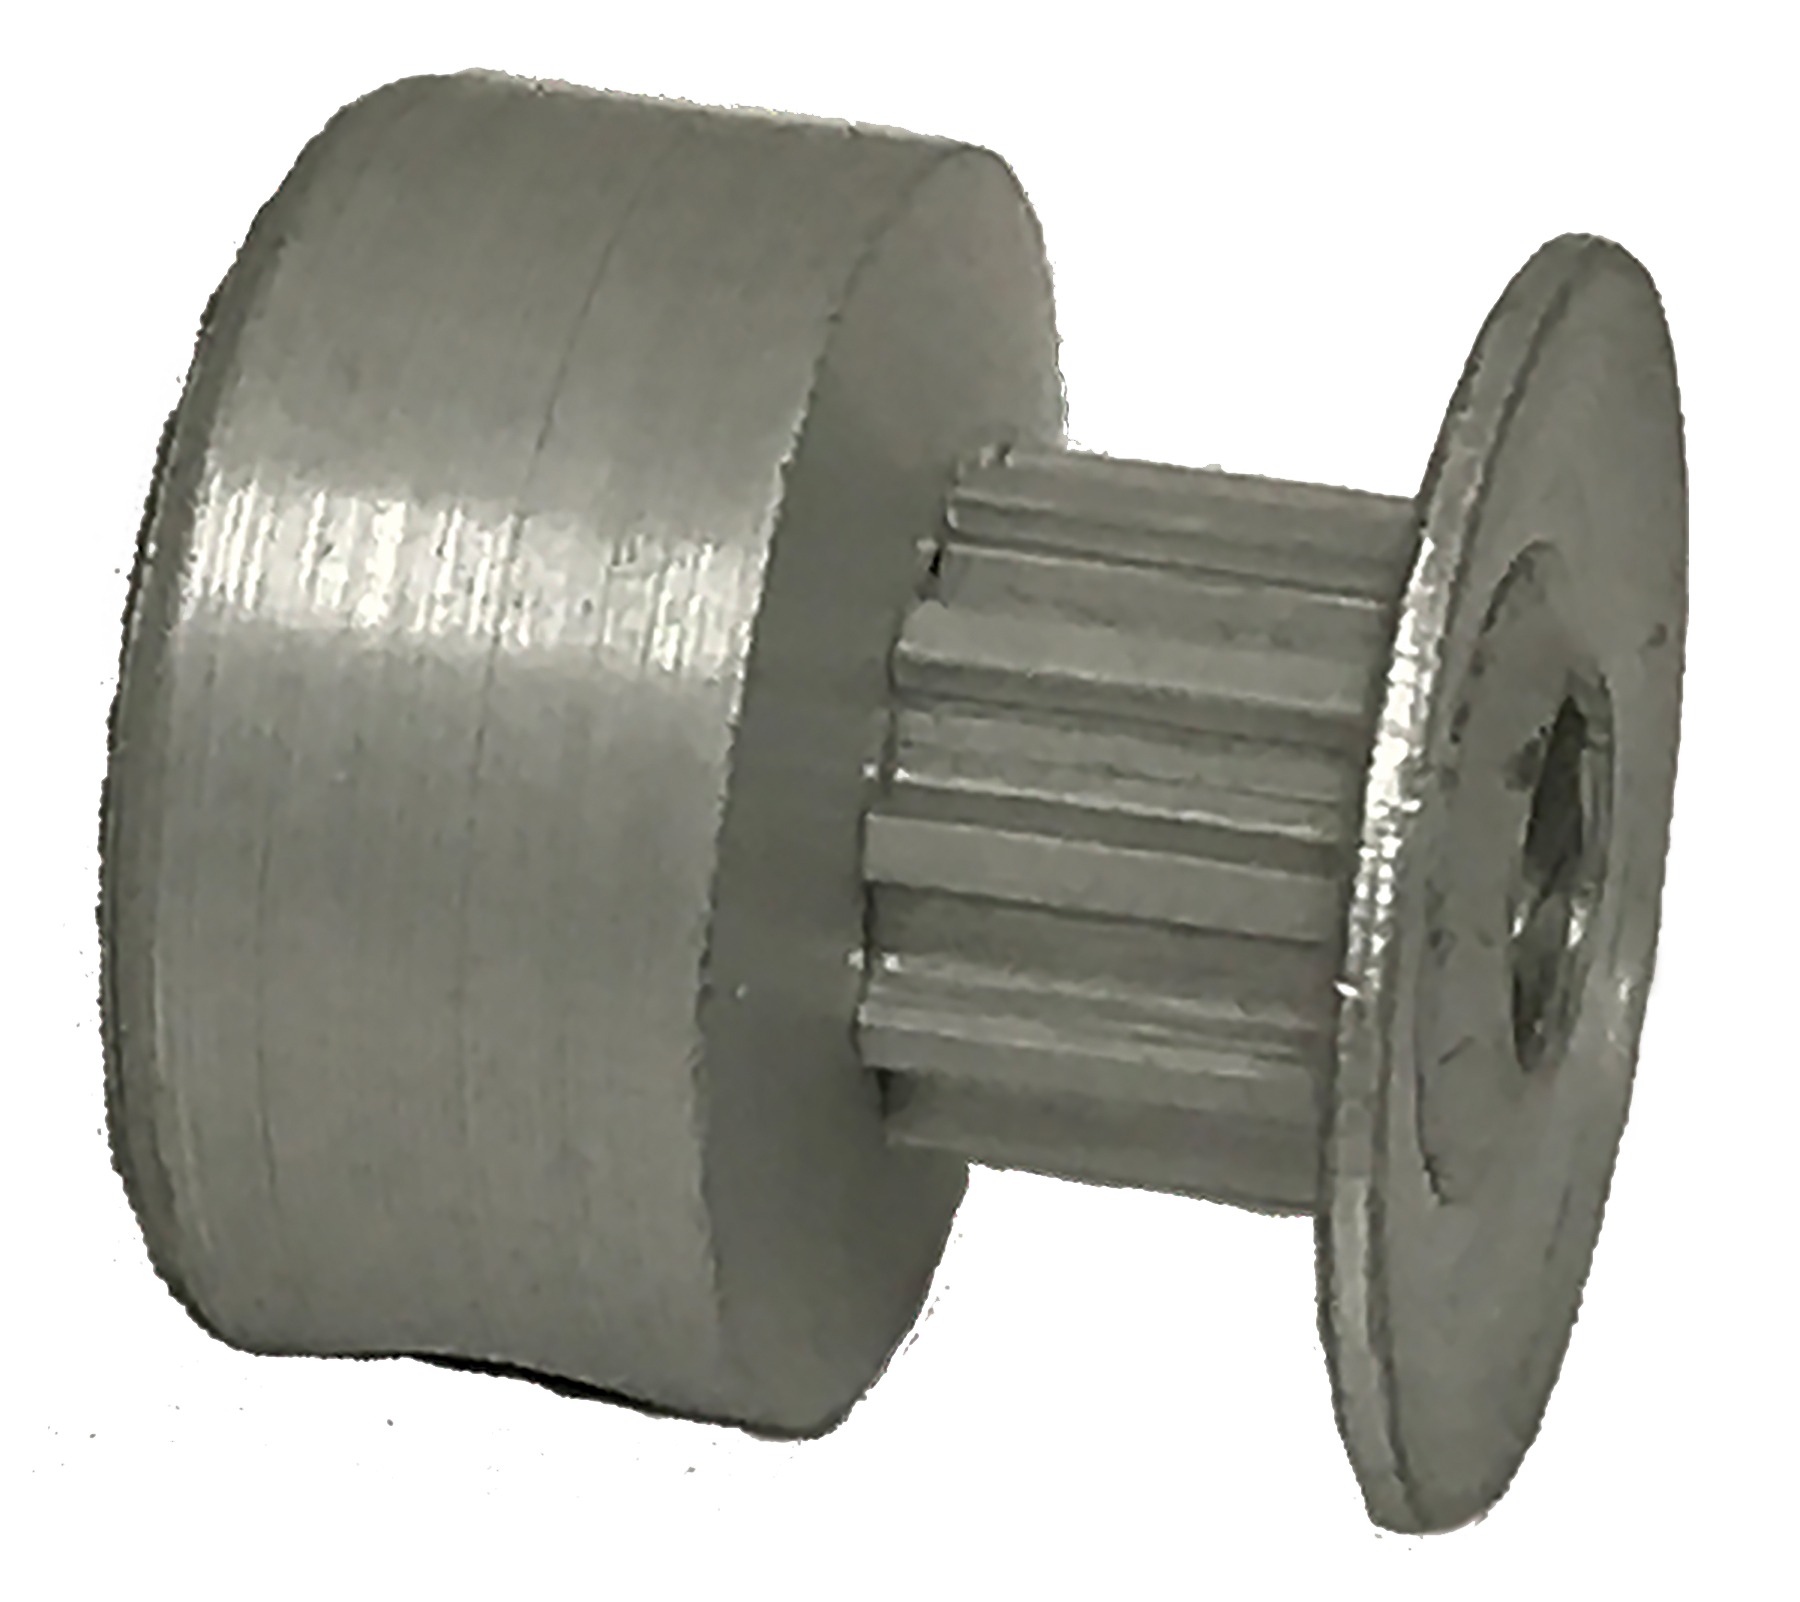 11MP012-6CA1 - Aluminum Imperial Pitch Pulleys